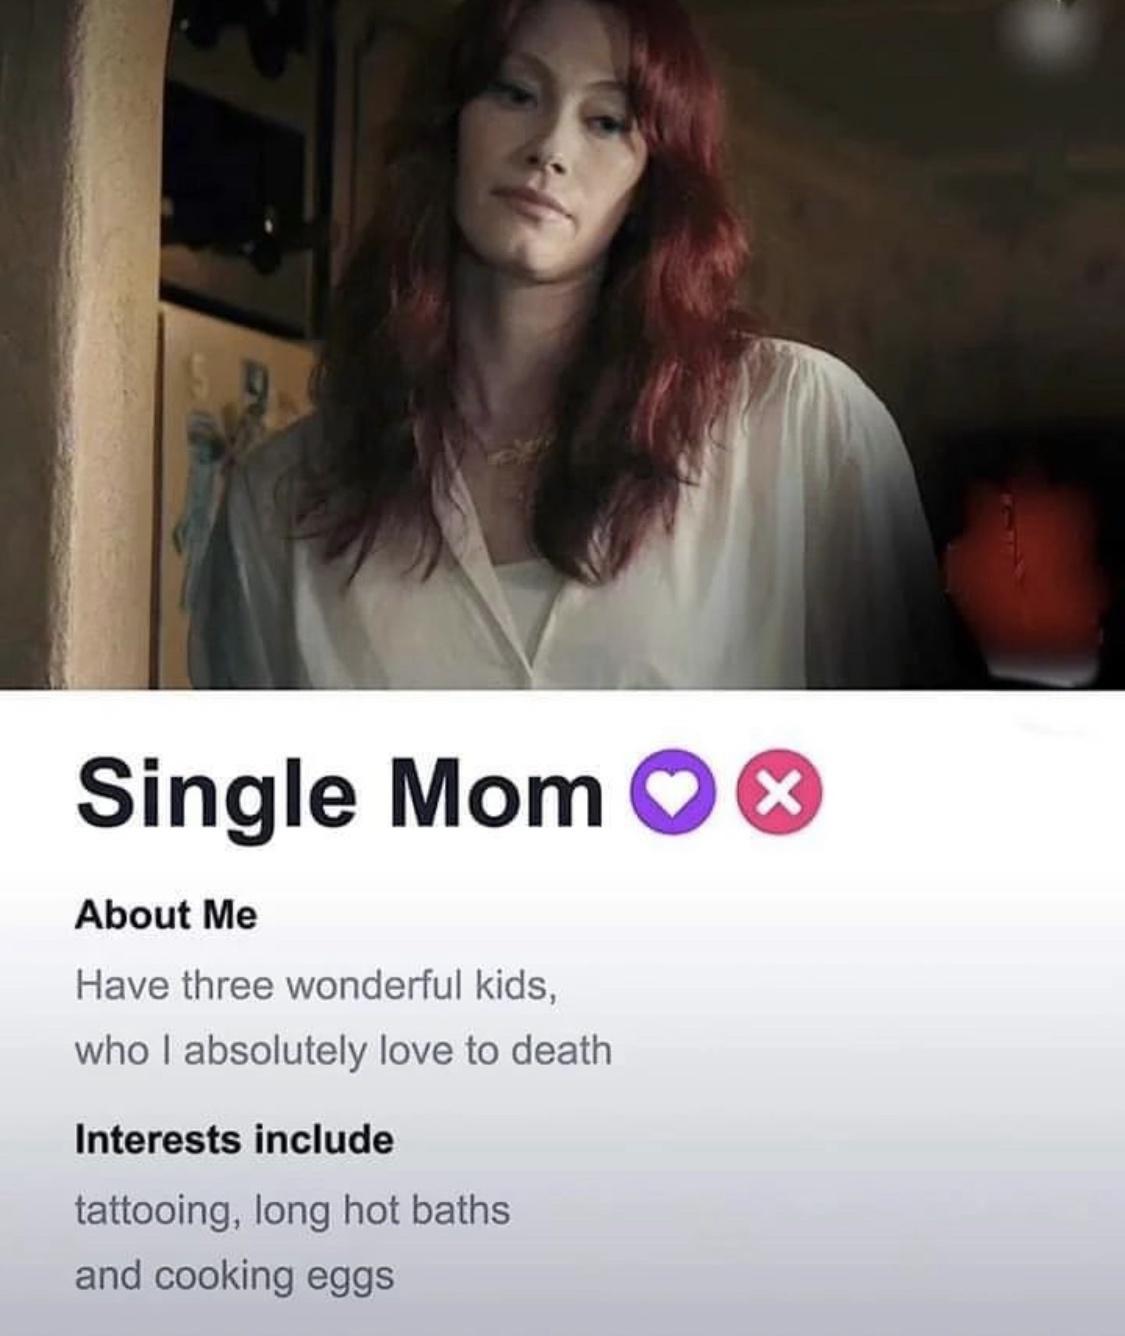 dank memes - Meme - Single Mom About Me Have three wonderful kids, who I absolutely love to death Interests include tattooing, long hot baths and cooking eggs